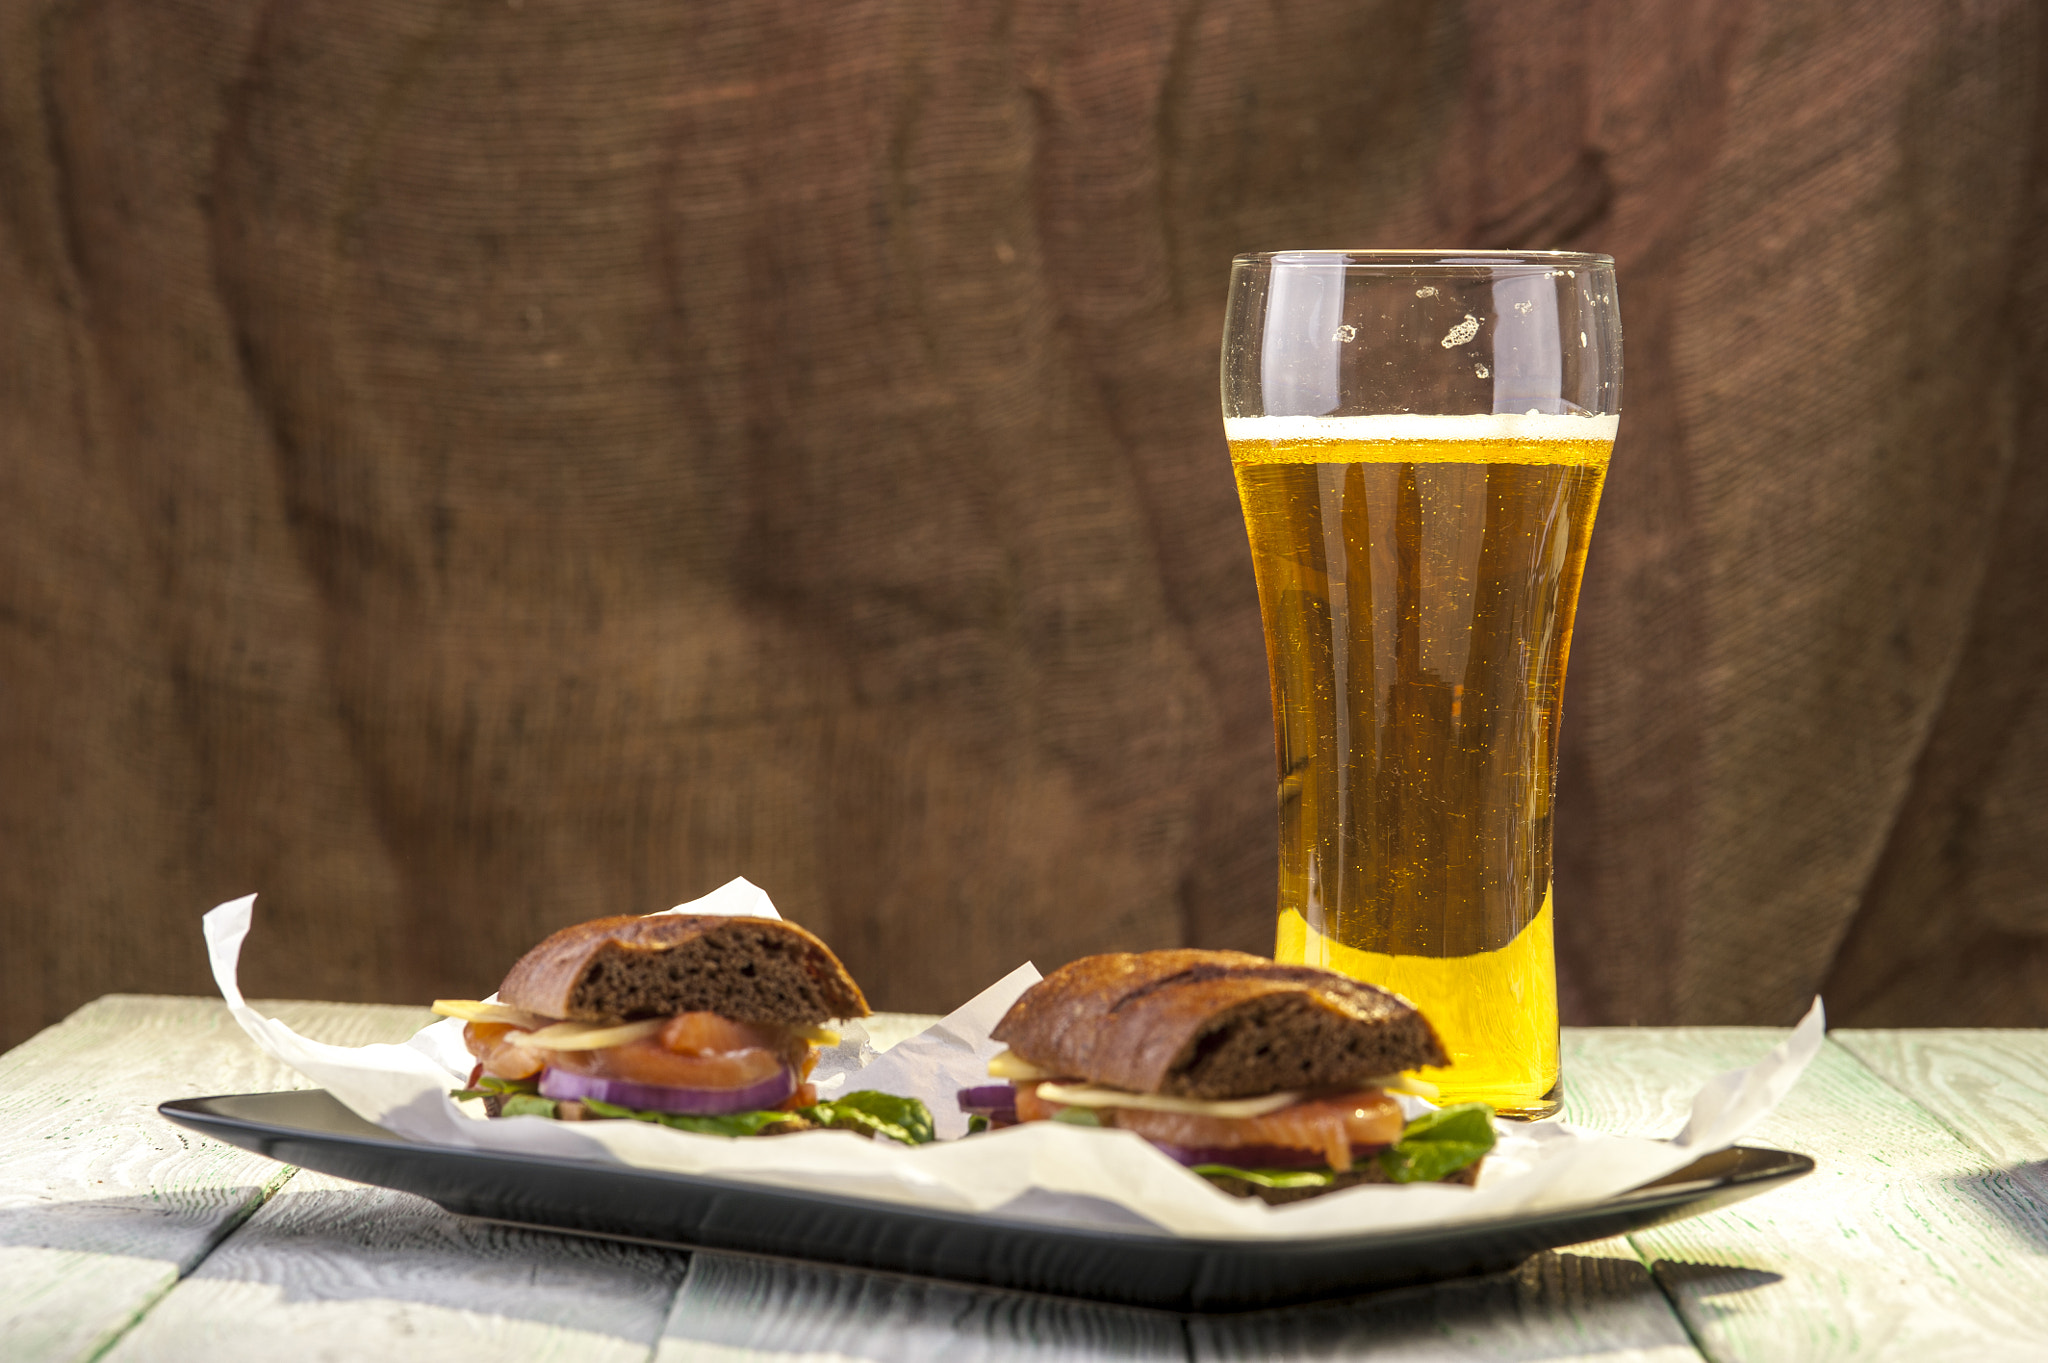 Nikon D700 sample photo. Black plate with sandwiches and beer glass photography